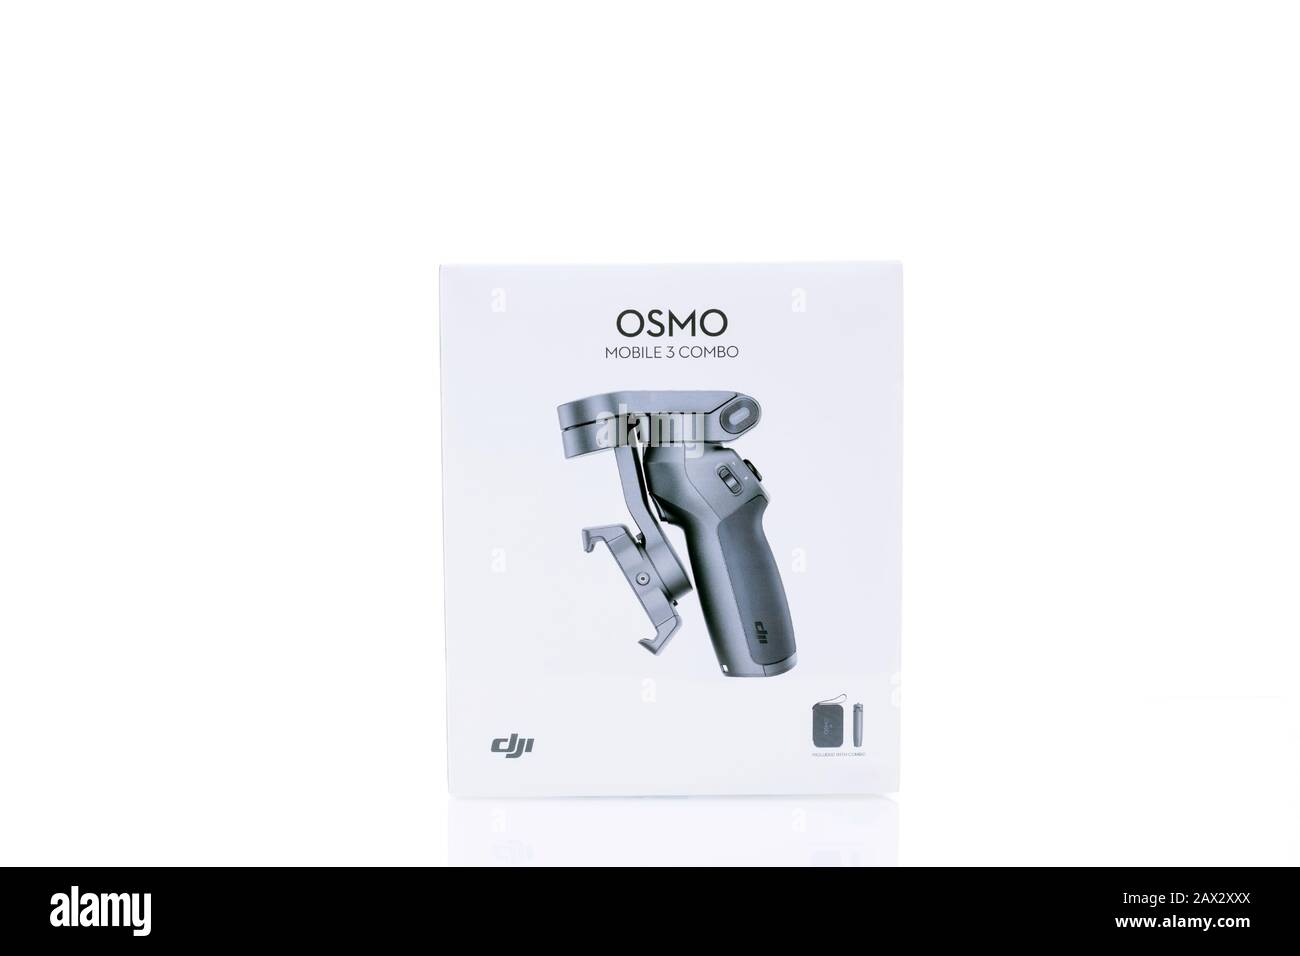 Dji Osmo Mobile 3 Smartphone High Resolution Stock Photography and Images -  Alamy